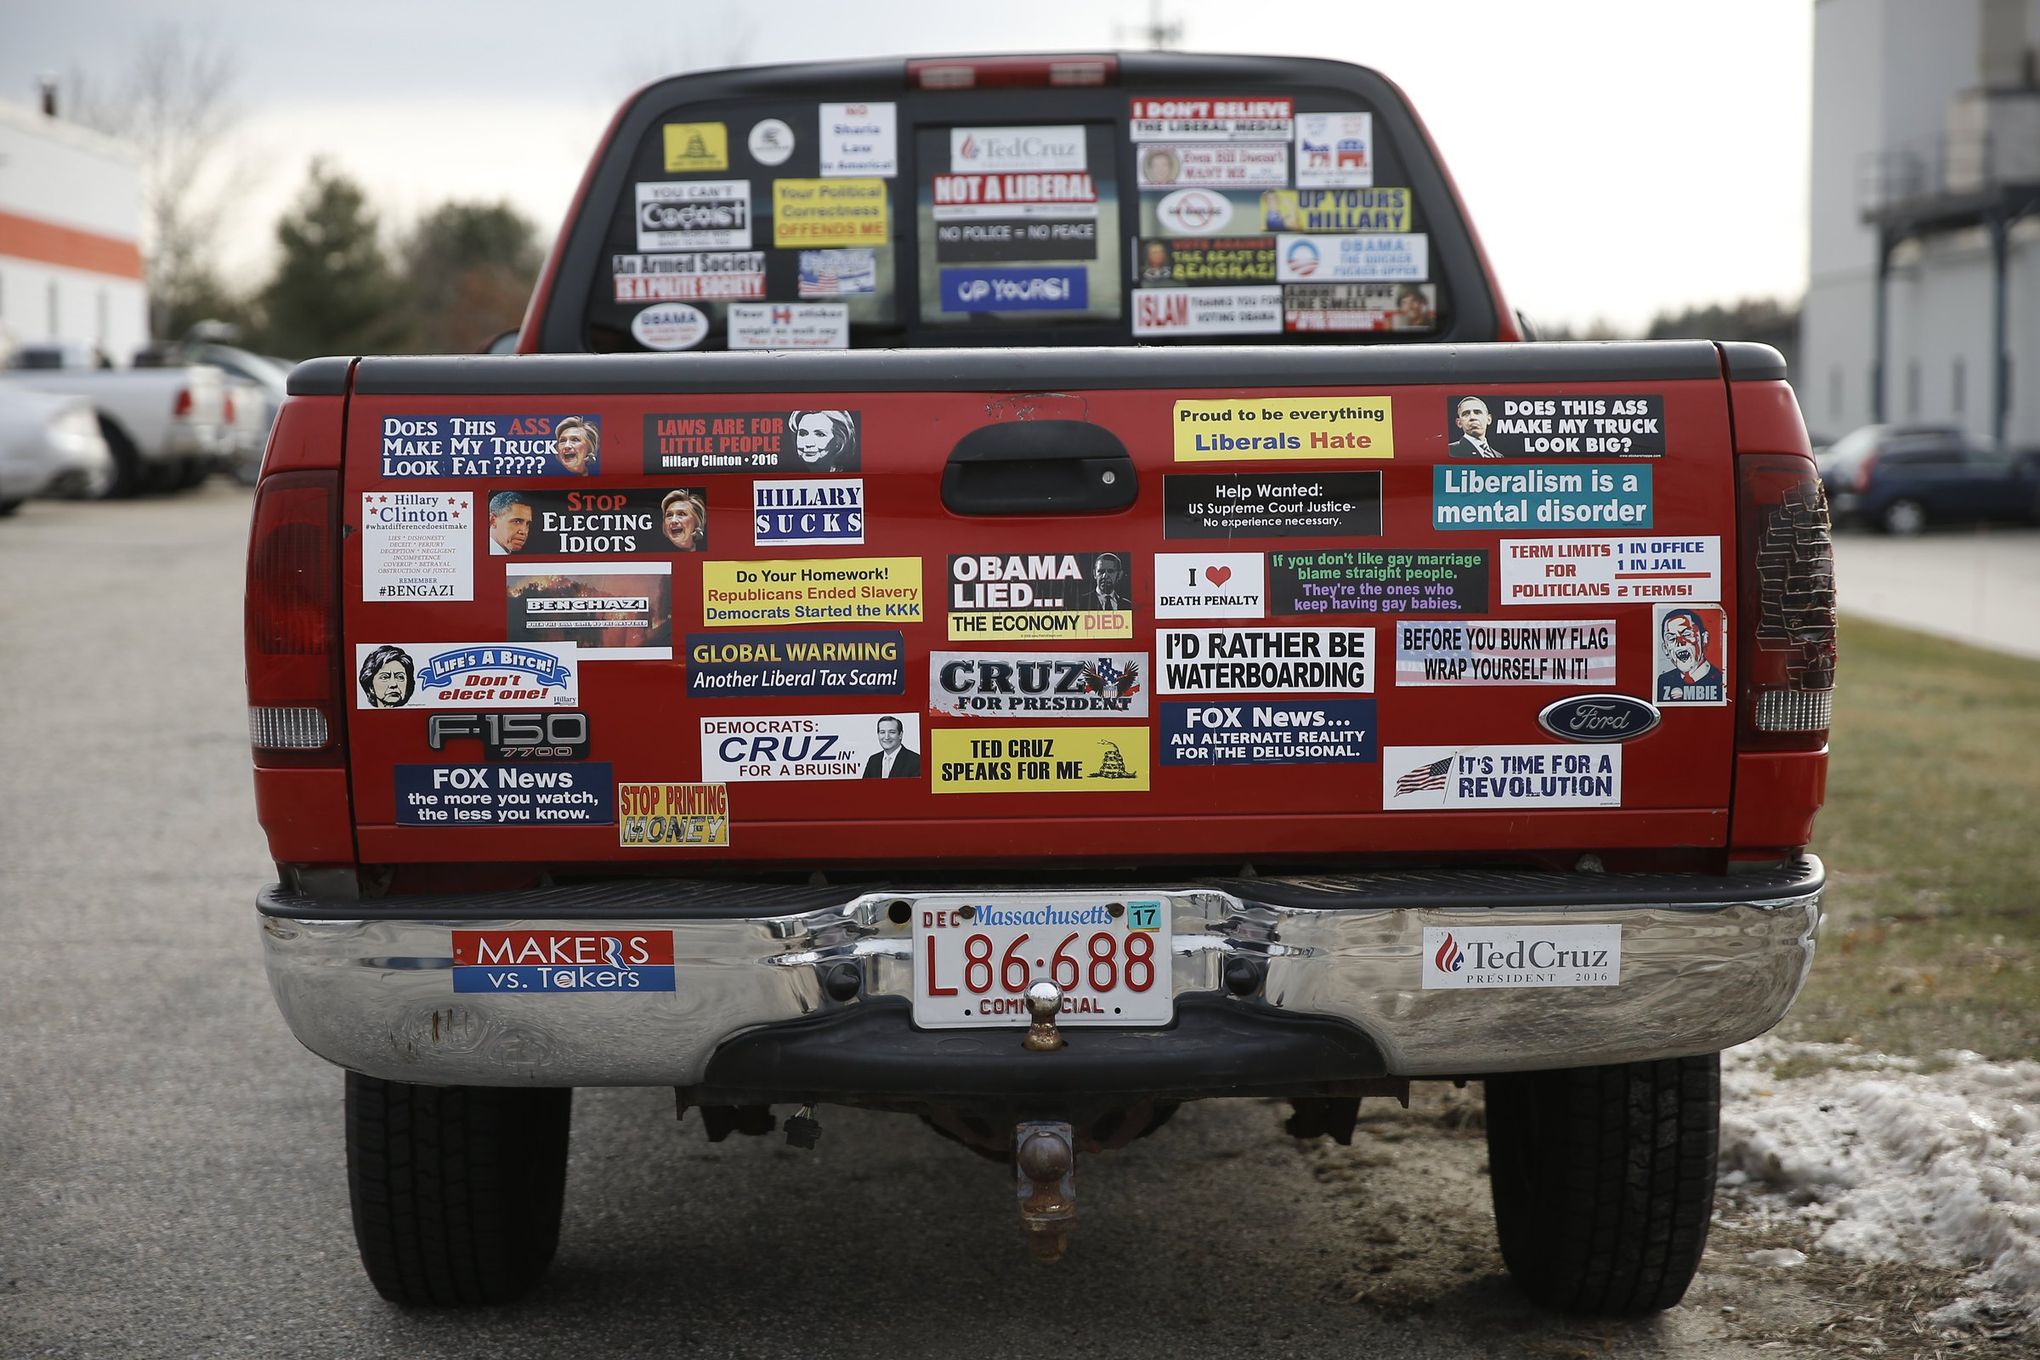 Here's how to remove those campaign bumper stickers